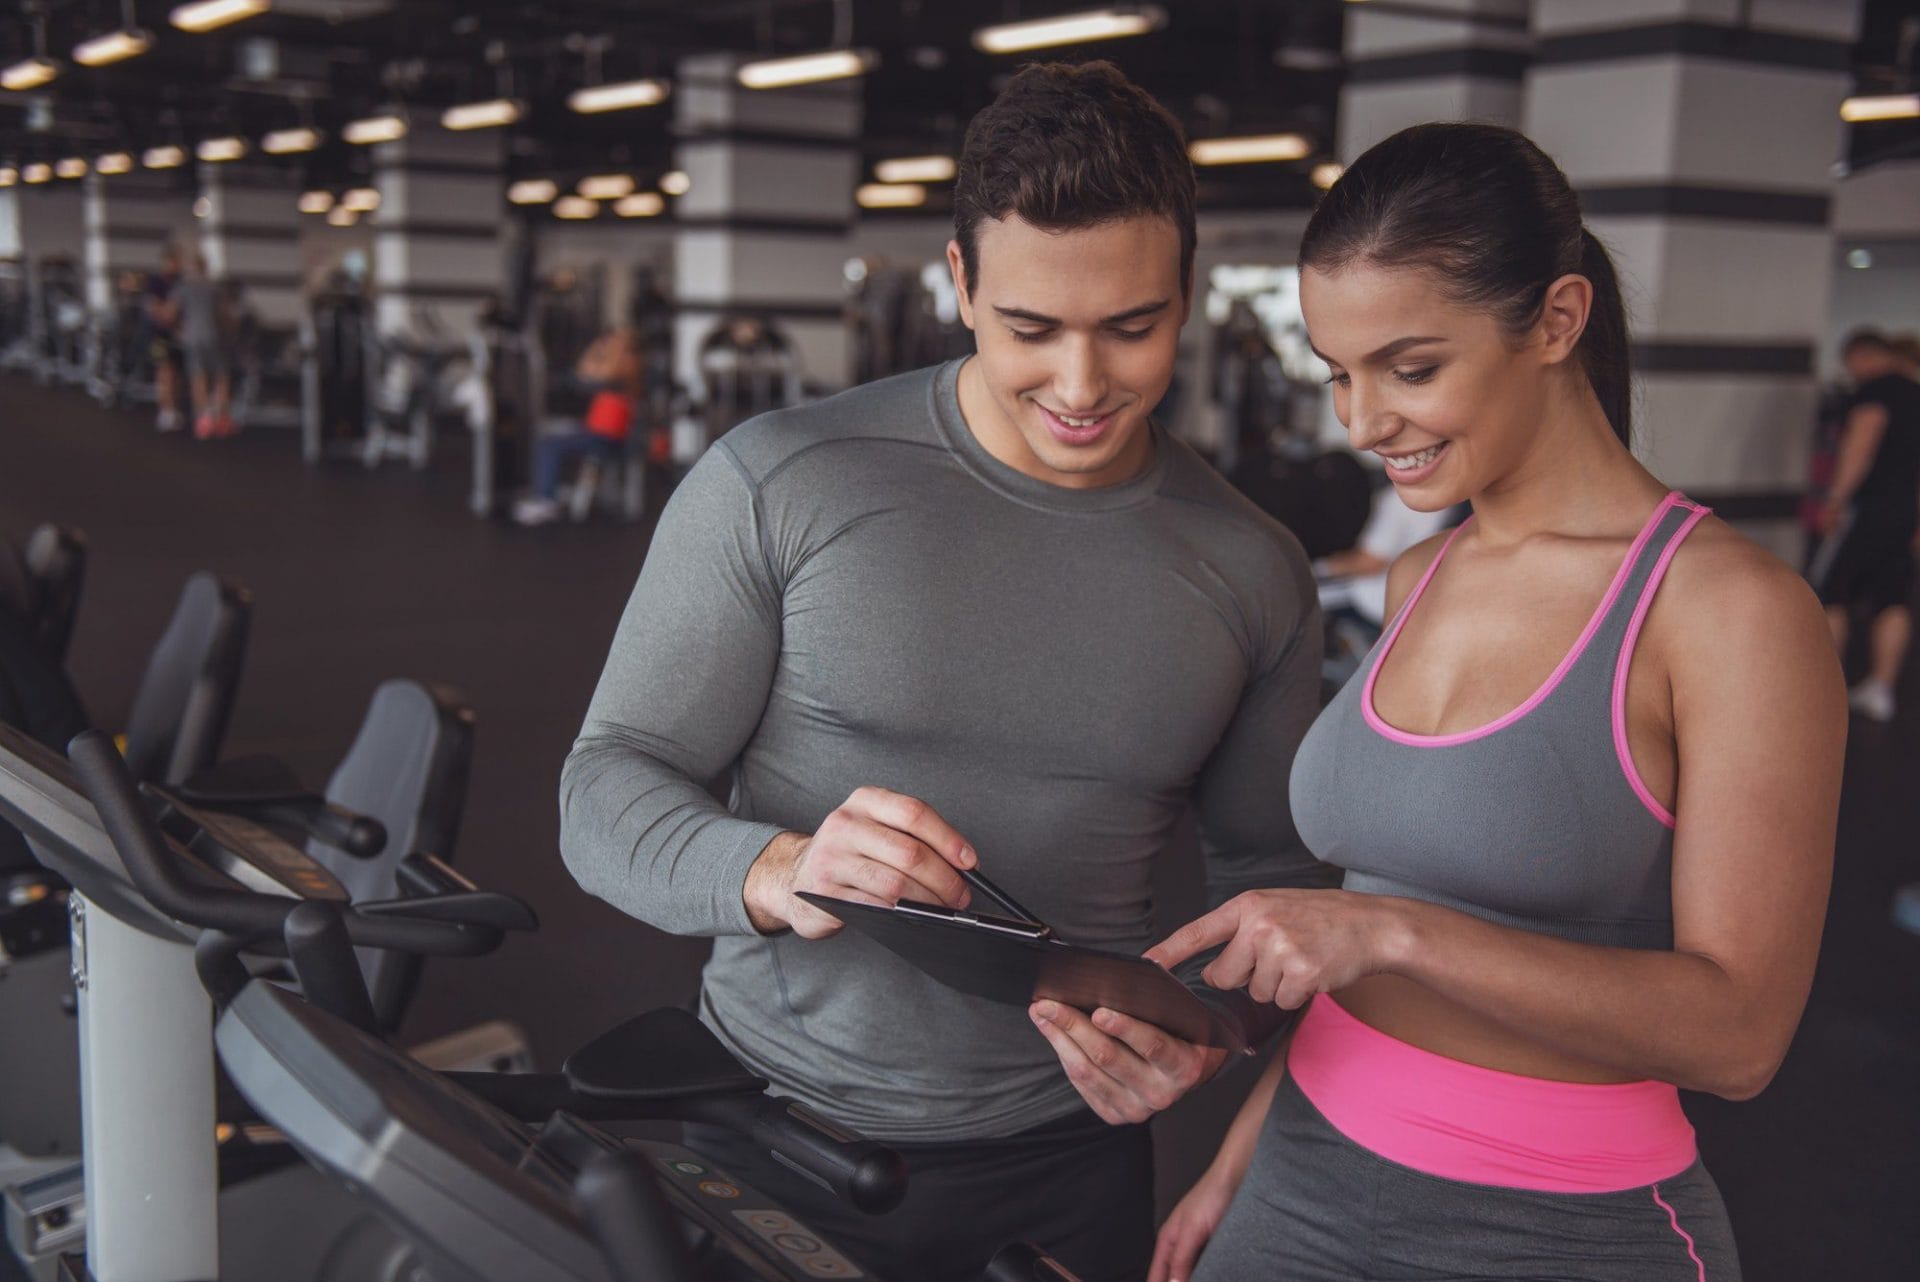 Gym Marketing Ideas to Attract More Members